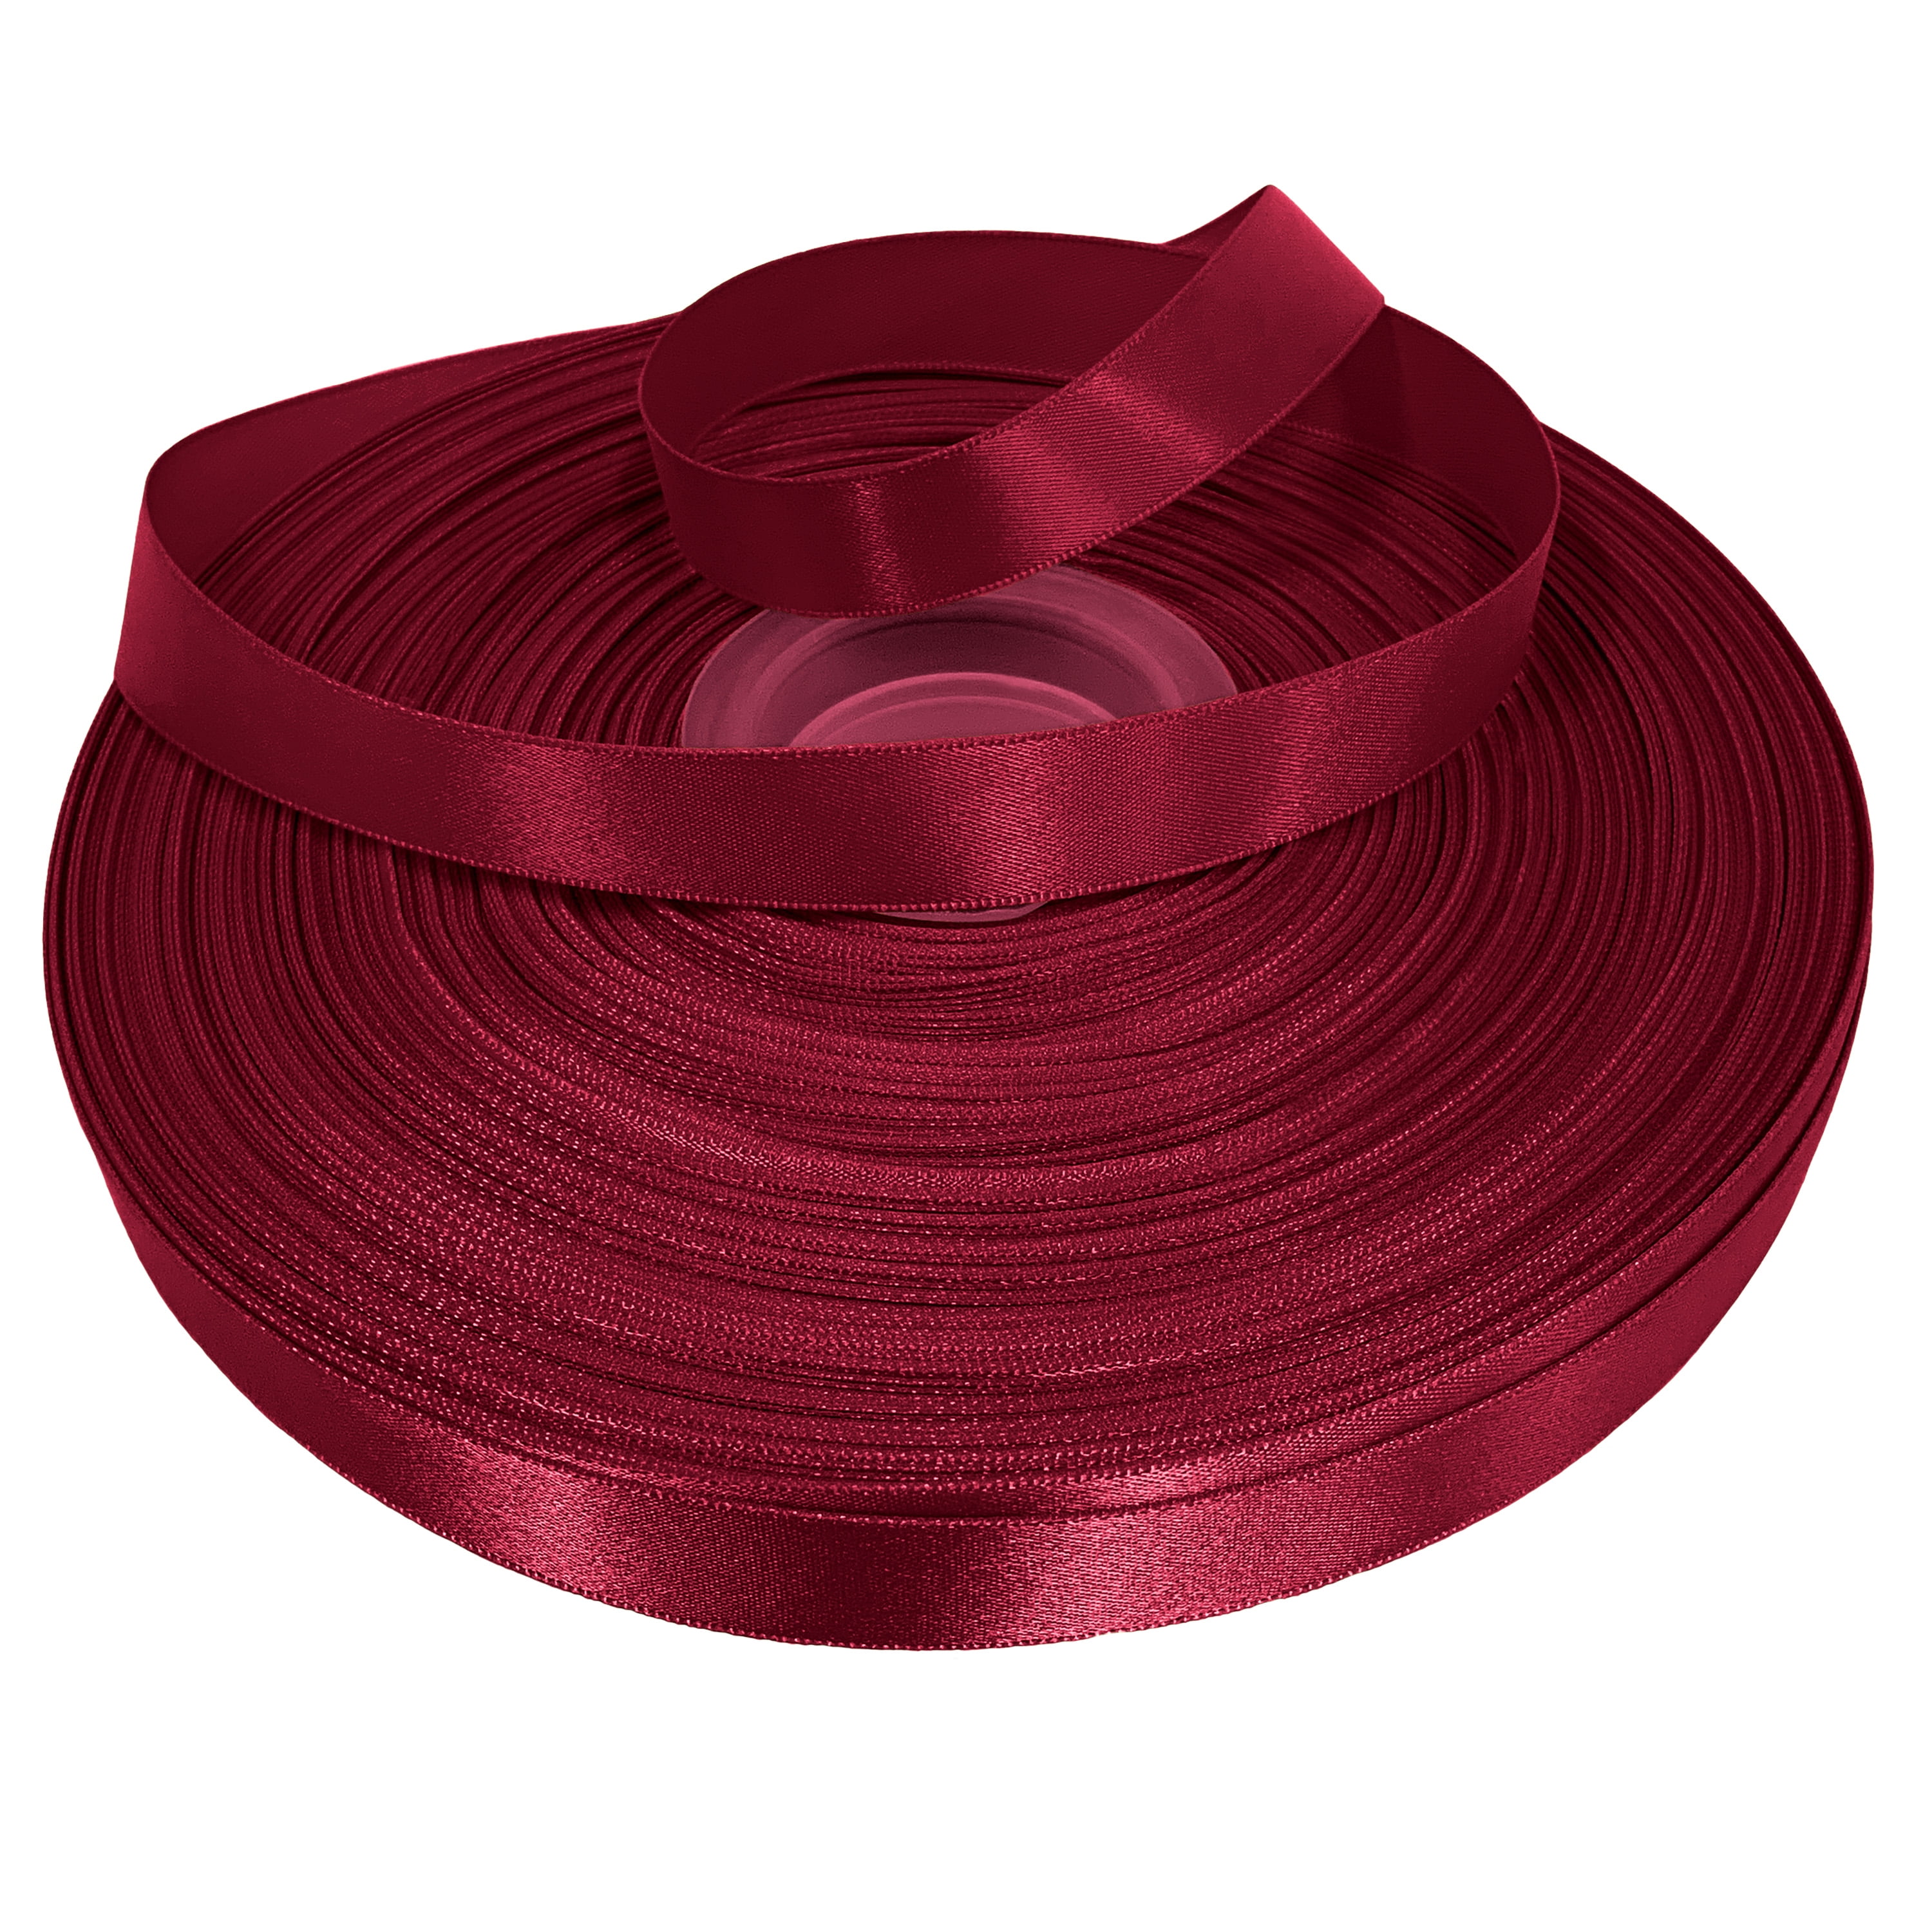 Pink, Wine, Burgundy, Rose Satin Ribbon Double Sided Luxurious Quality  Satin for Weddings, Invitations, Sashes, Crafts, Apparel, By the Yard